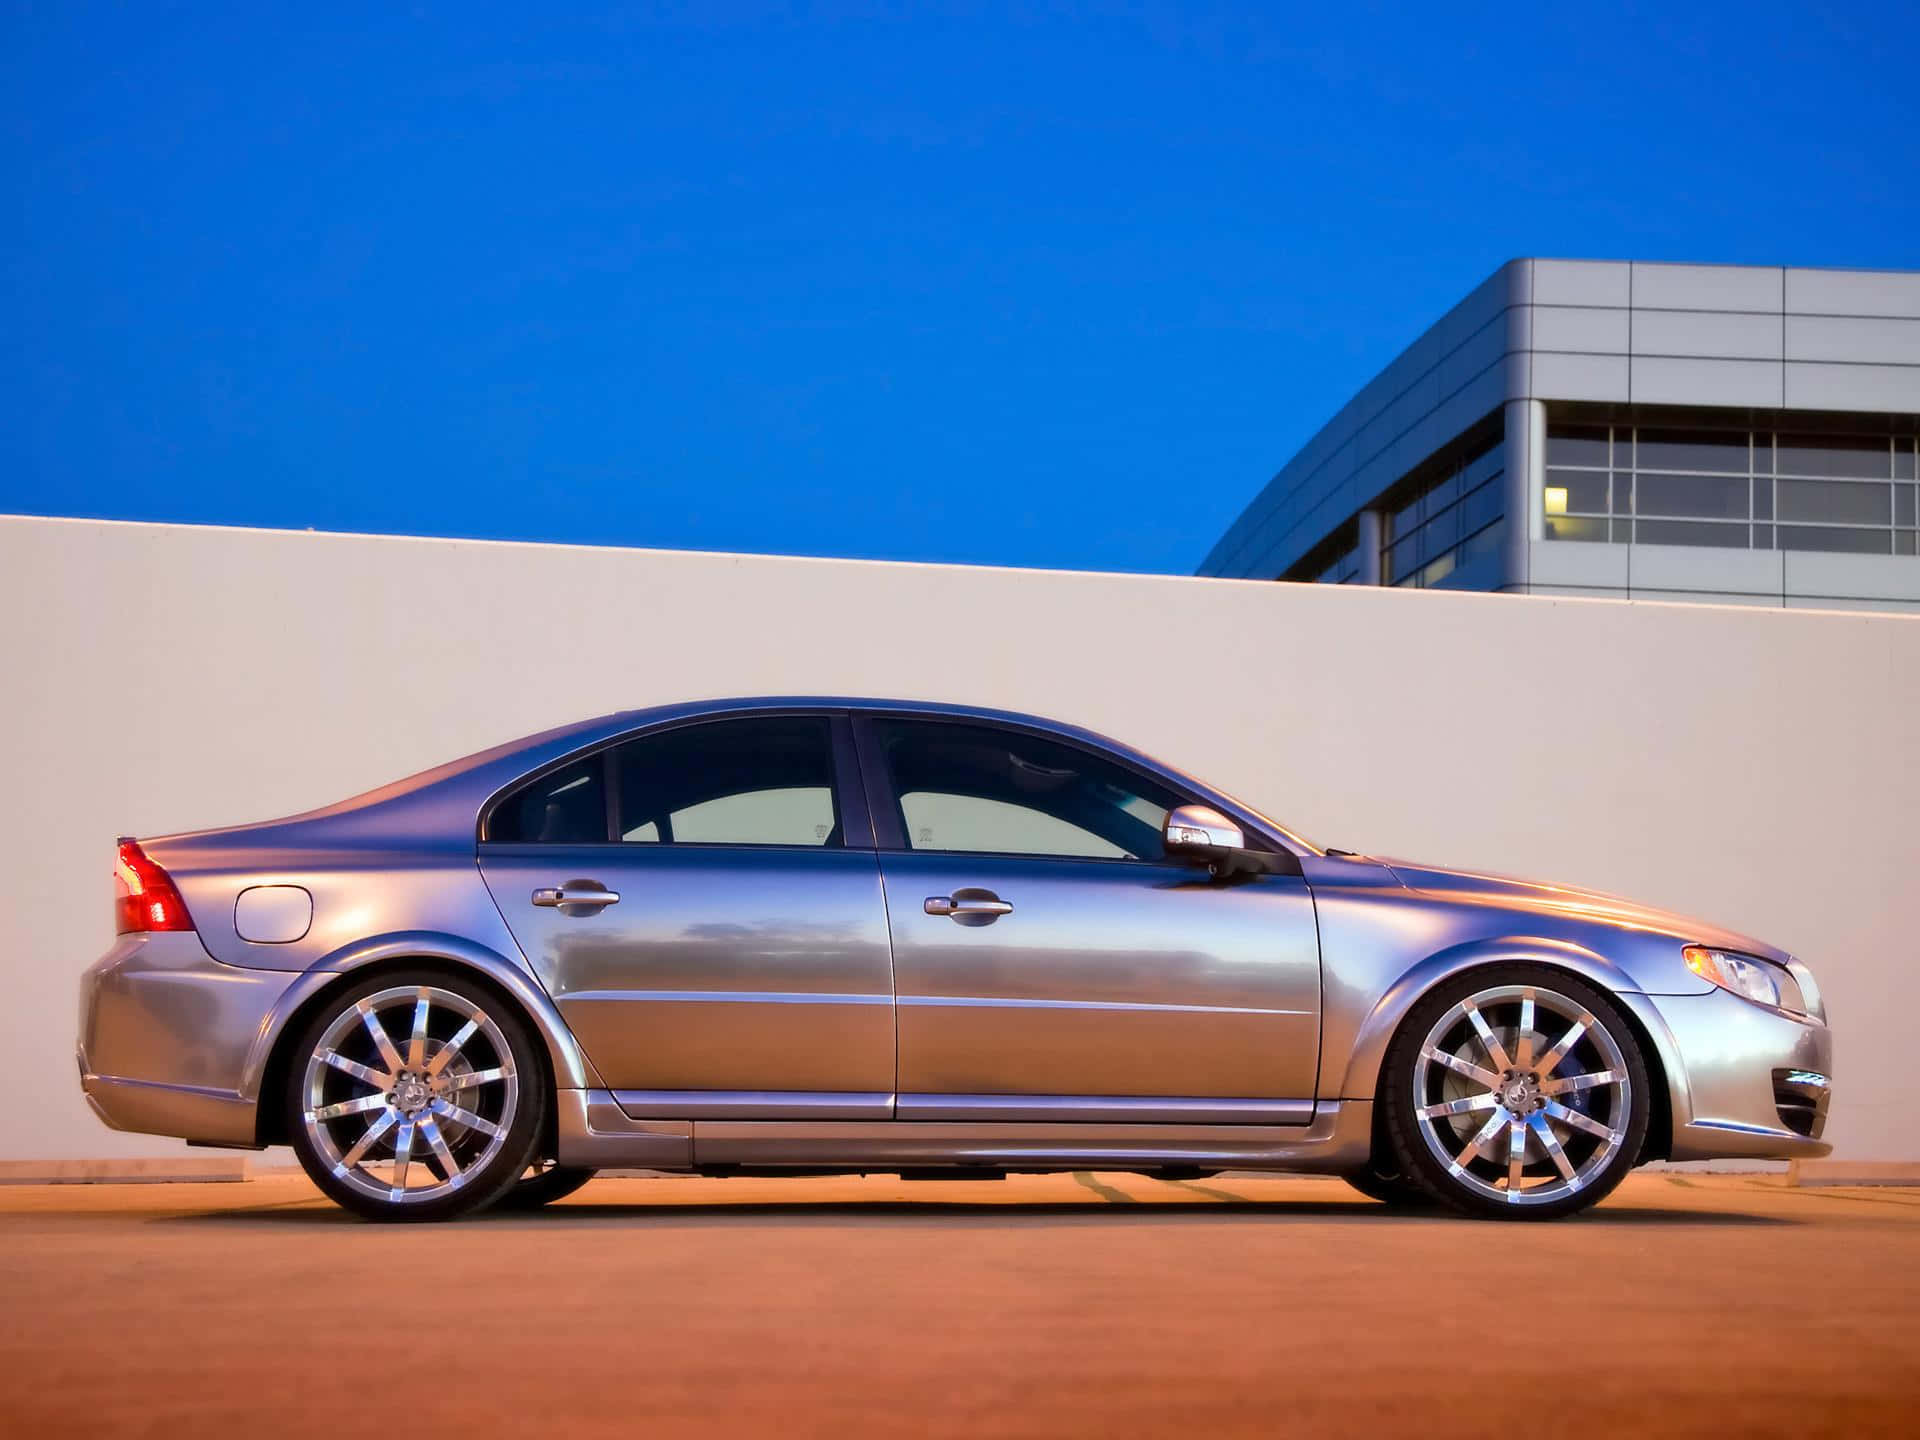 The Luxurious Volvo S80 Gliding On The Highway Wallpaper